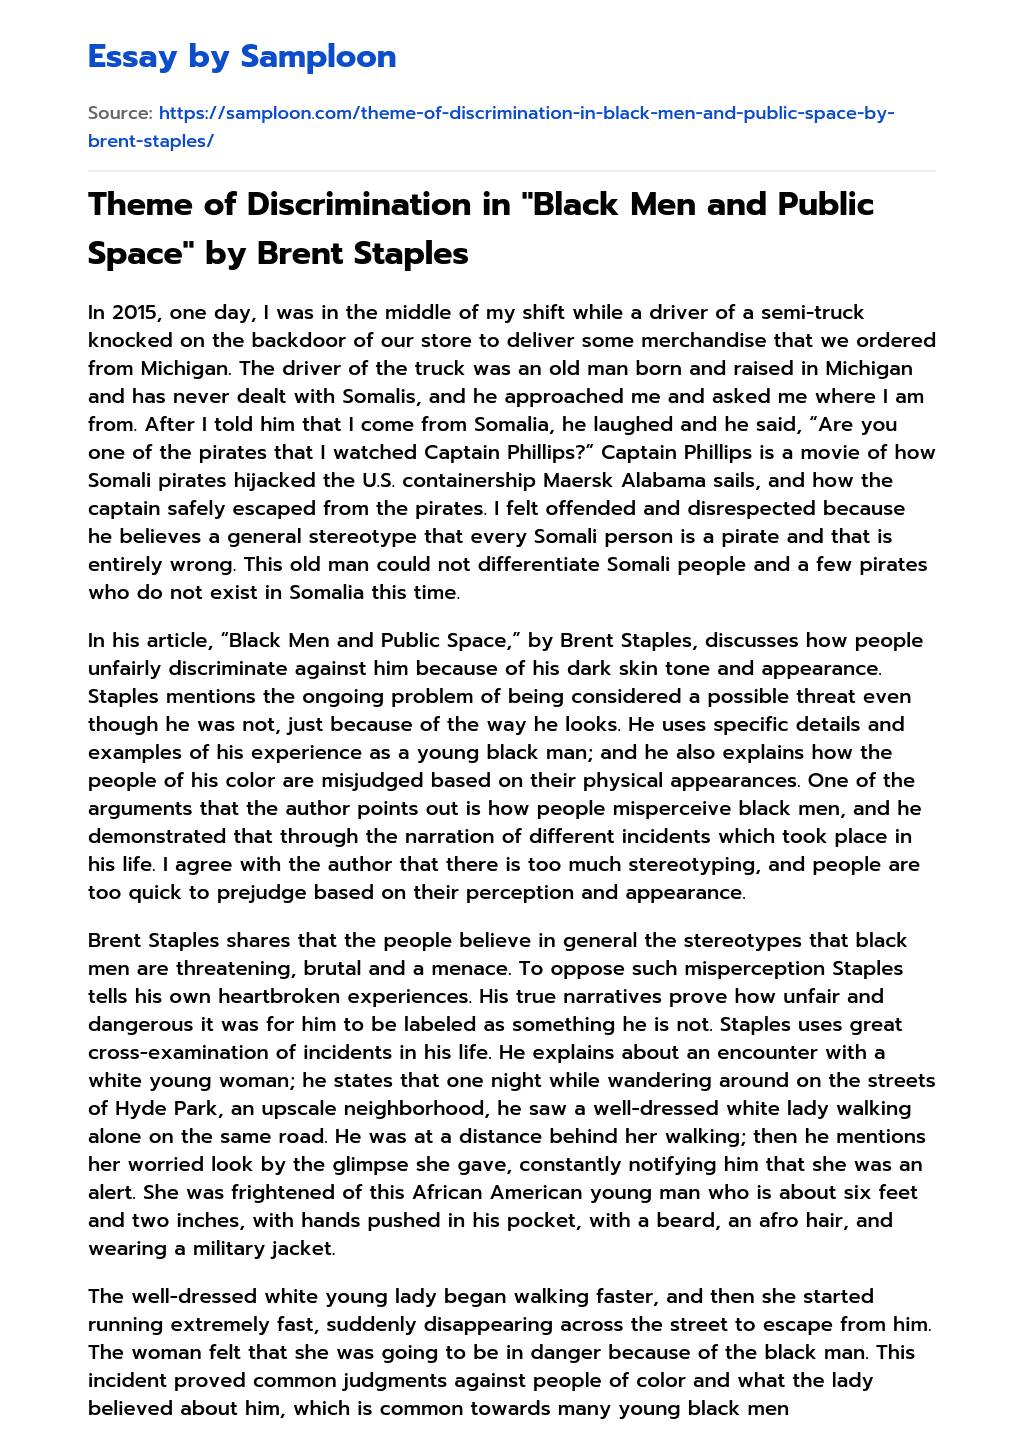 Theme of Discrimination in “Black Men and Public Space” by Brent Staples Analytical Essay essay